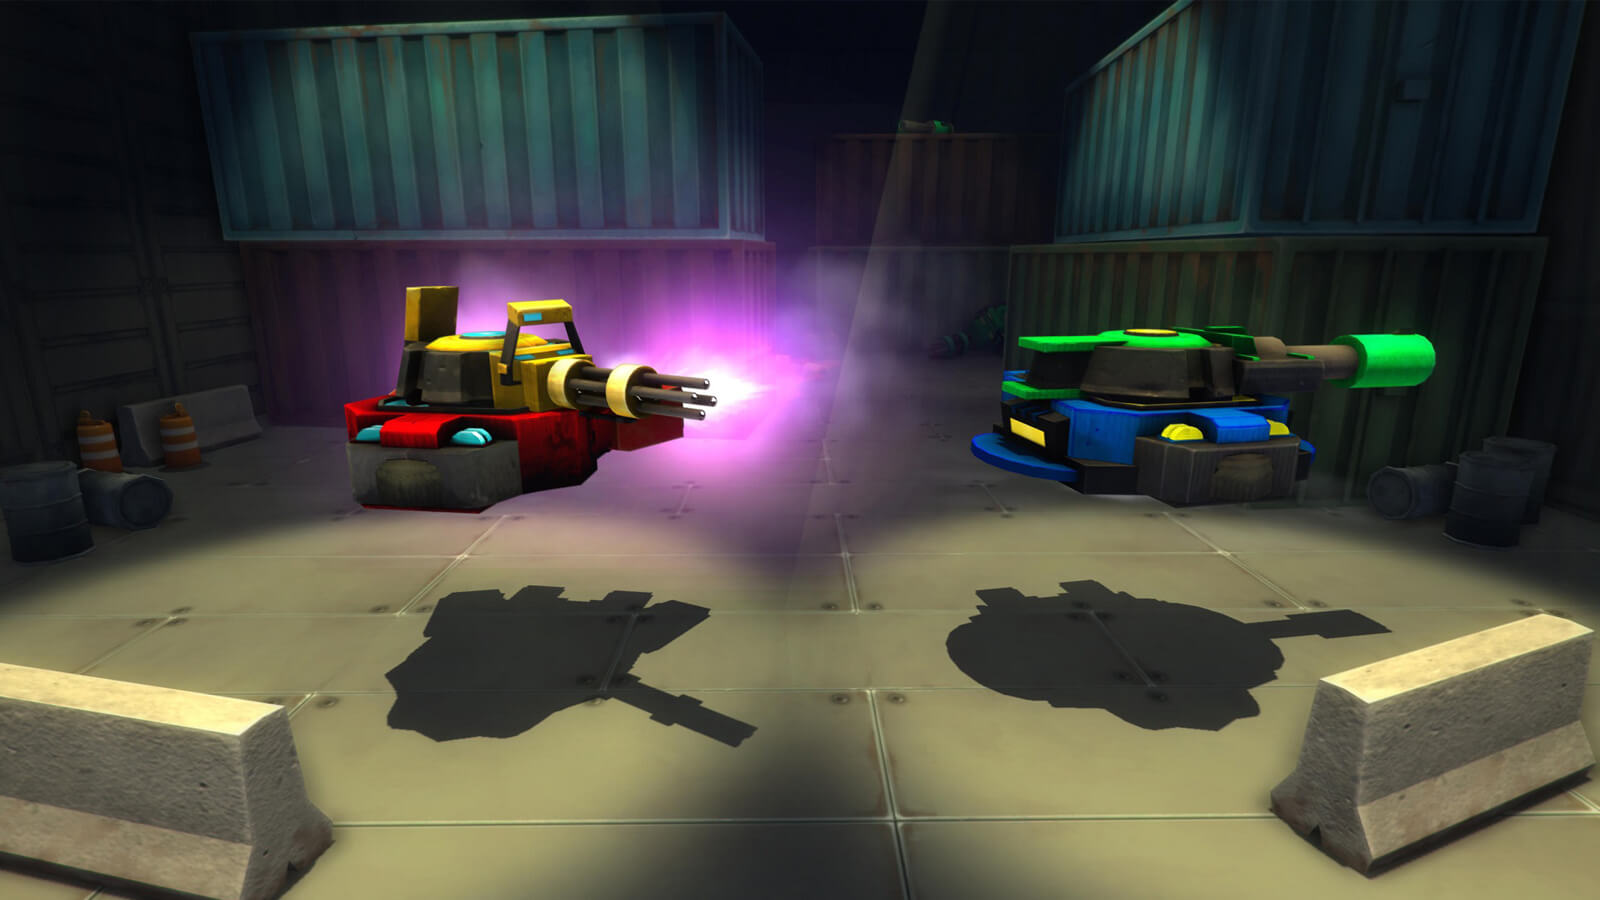 A hover-tank with a yellow machine gun turret and a red base, and another with a green turret and blue base.